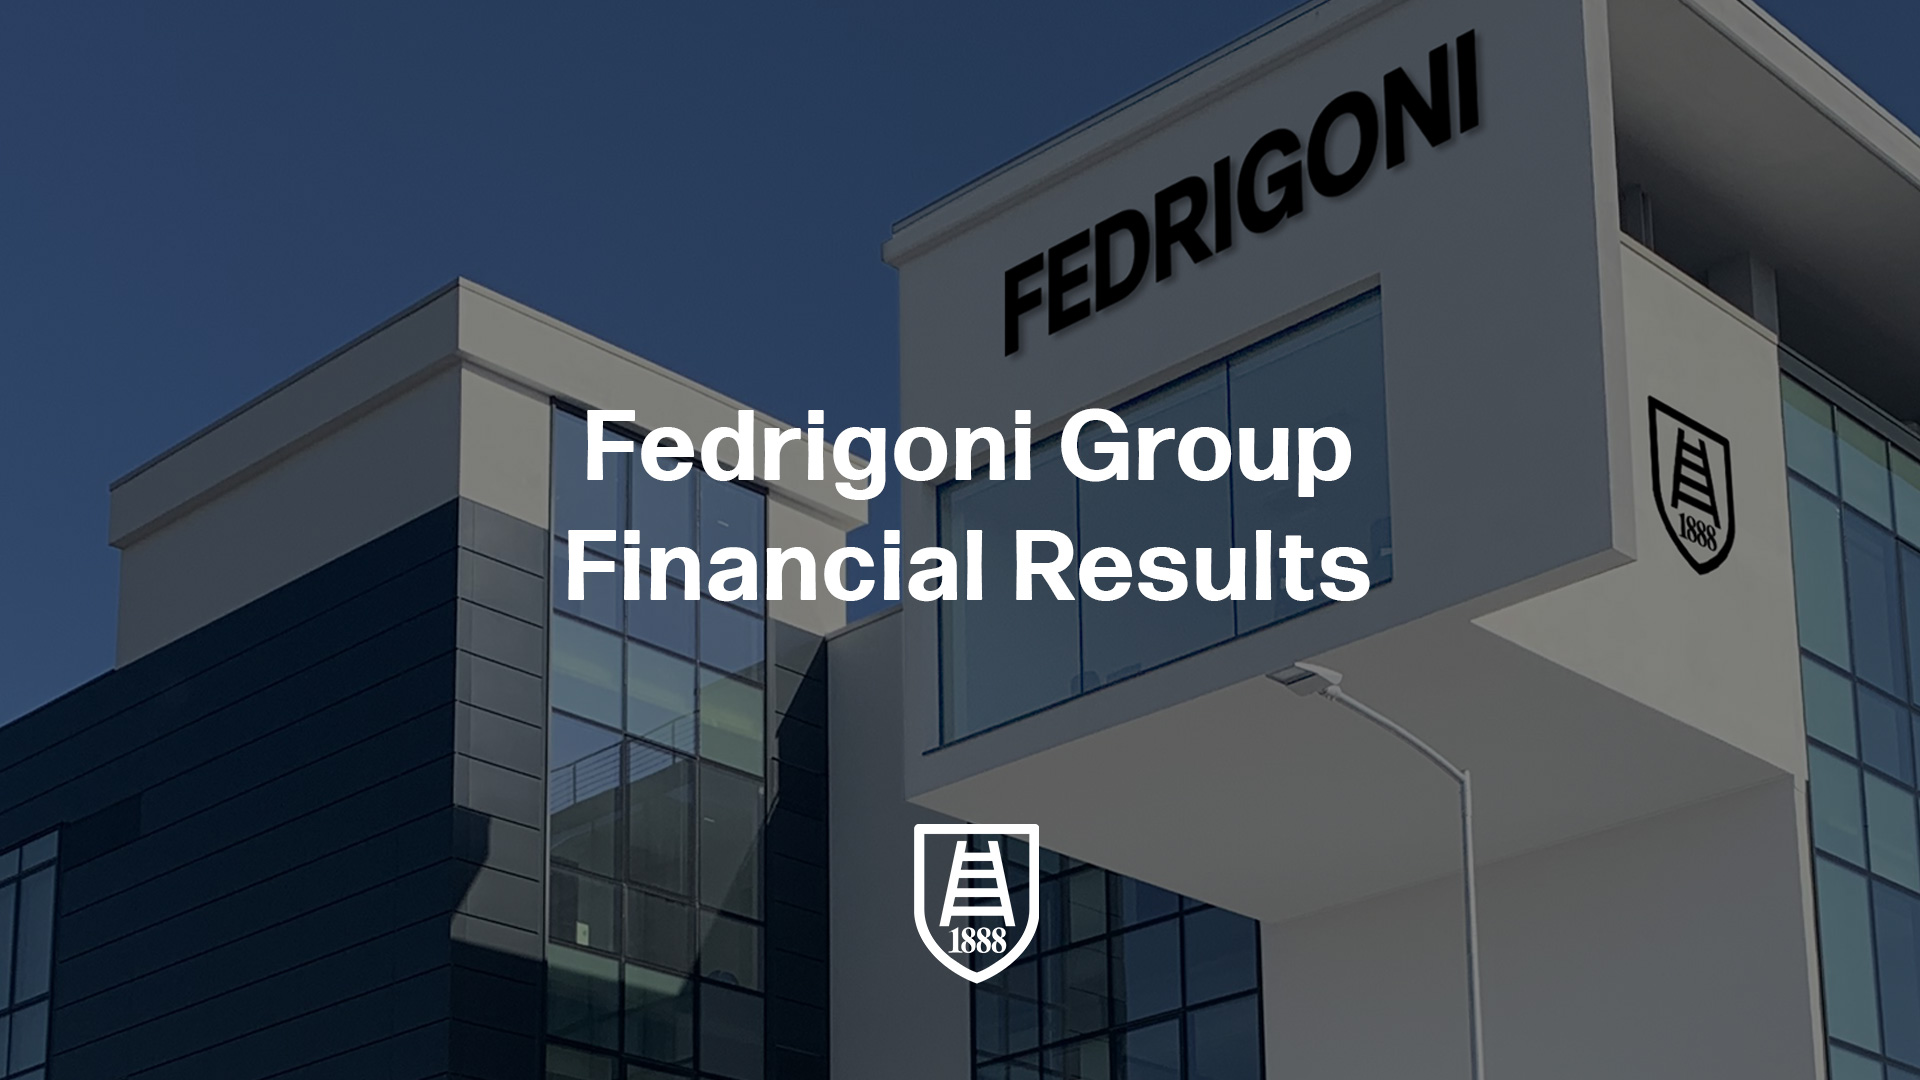 Fedrigoni Group Strong Growth: financial results over last 12 months